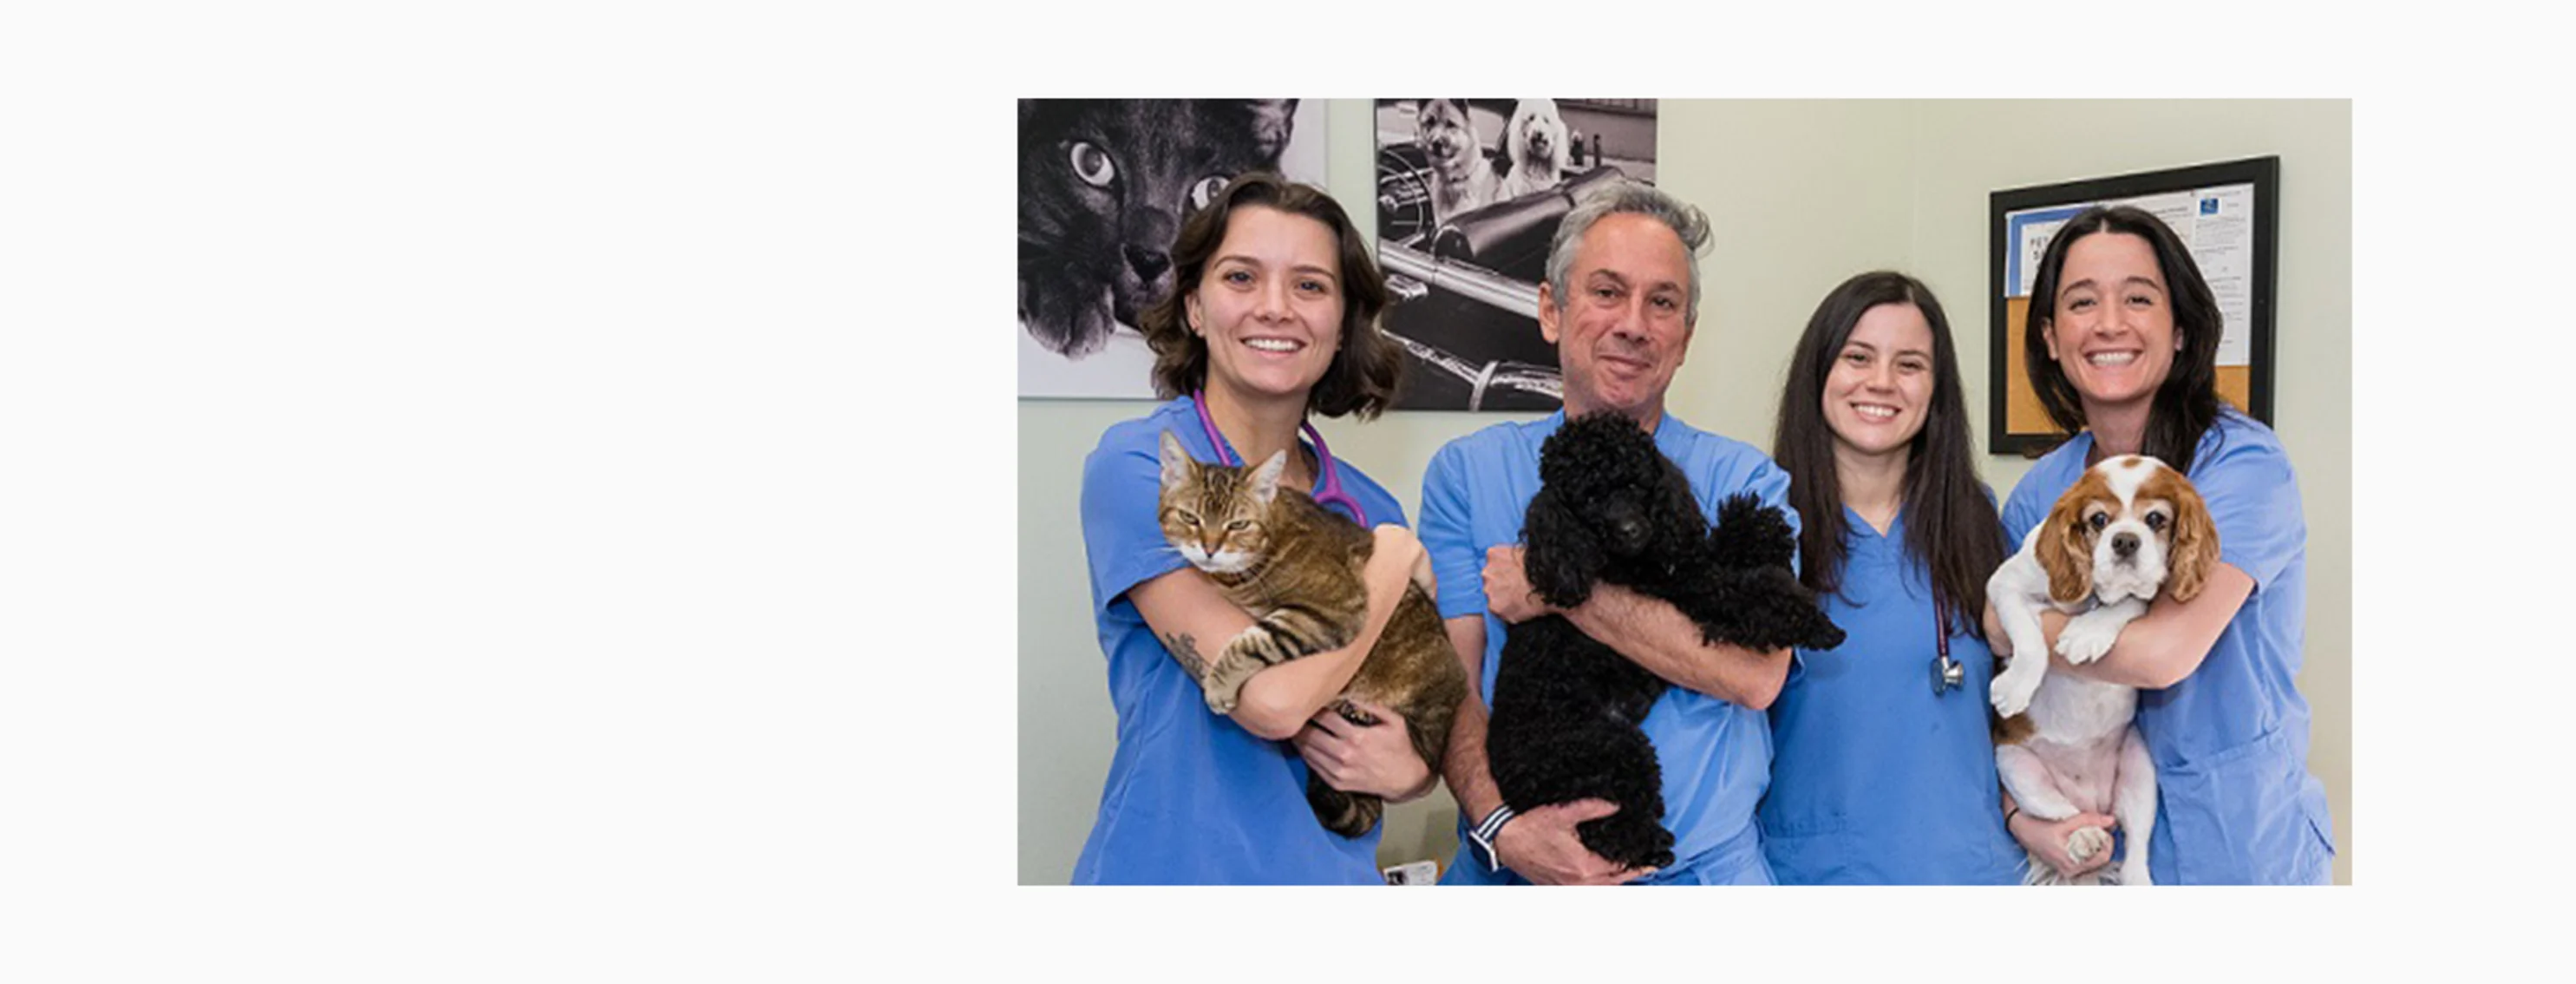 Group photo of staff at Battery Park Veterinary Hospital